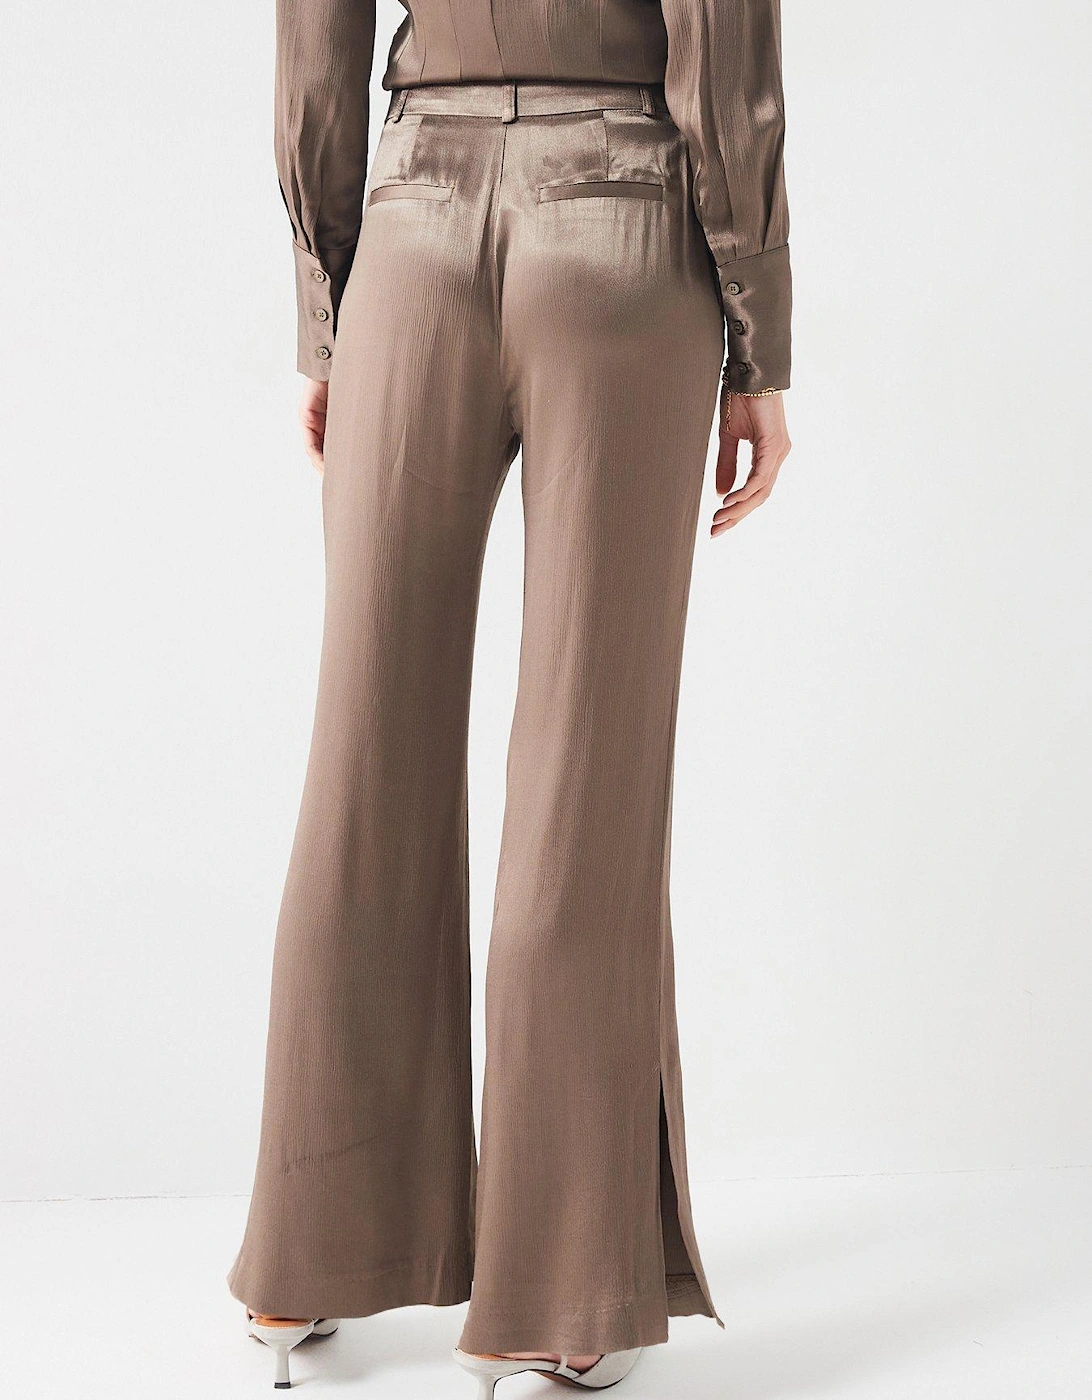 Co ord Textured Trouser